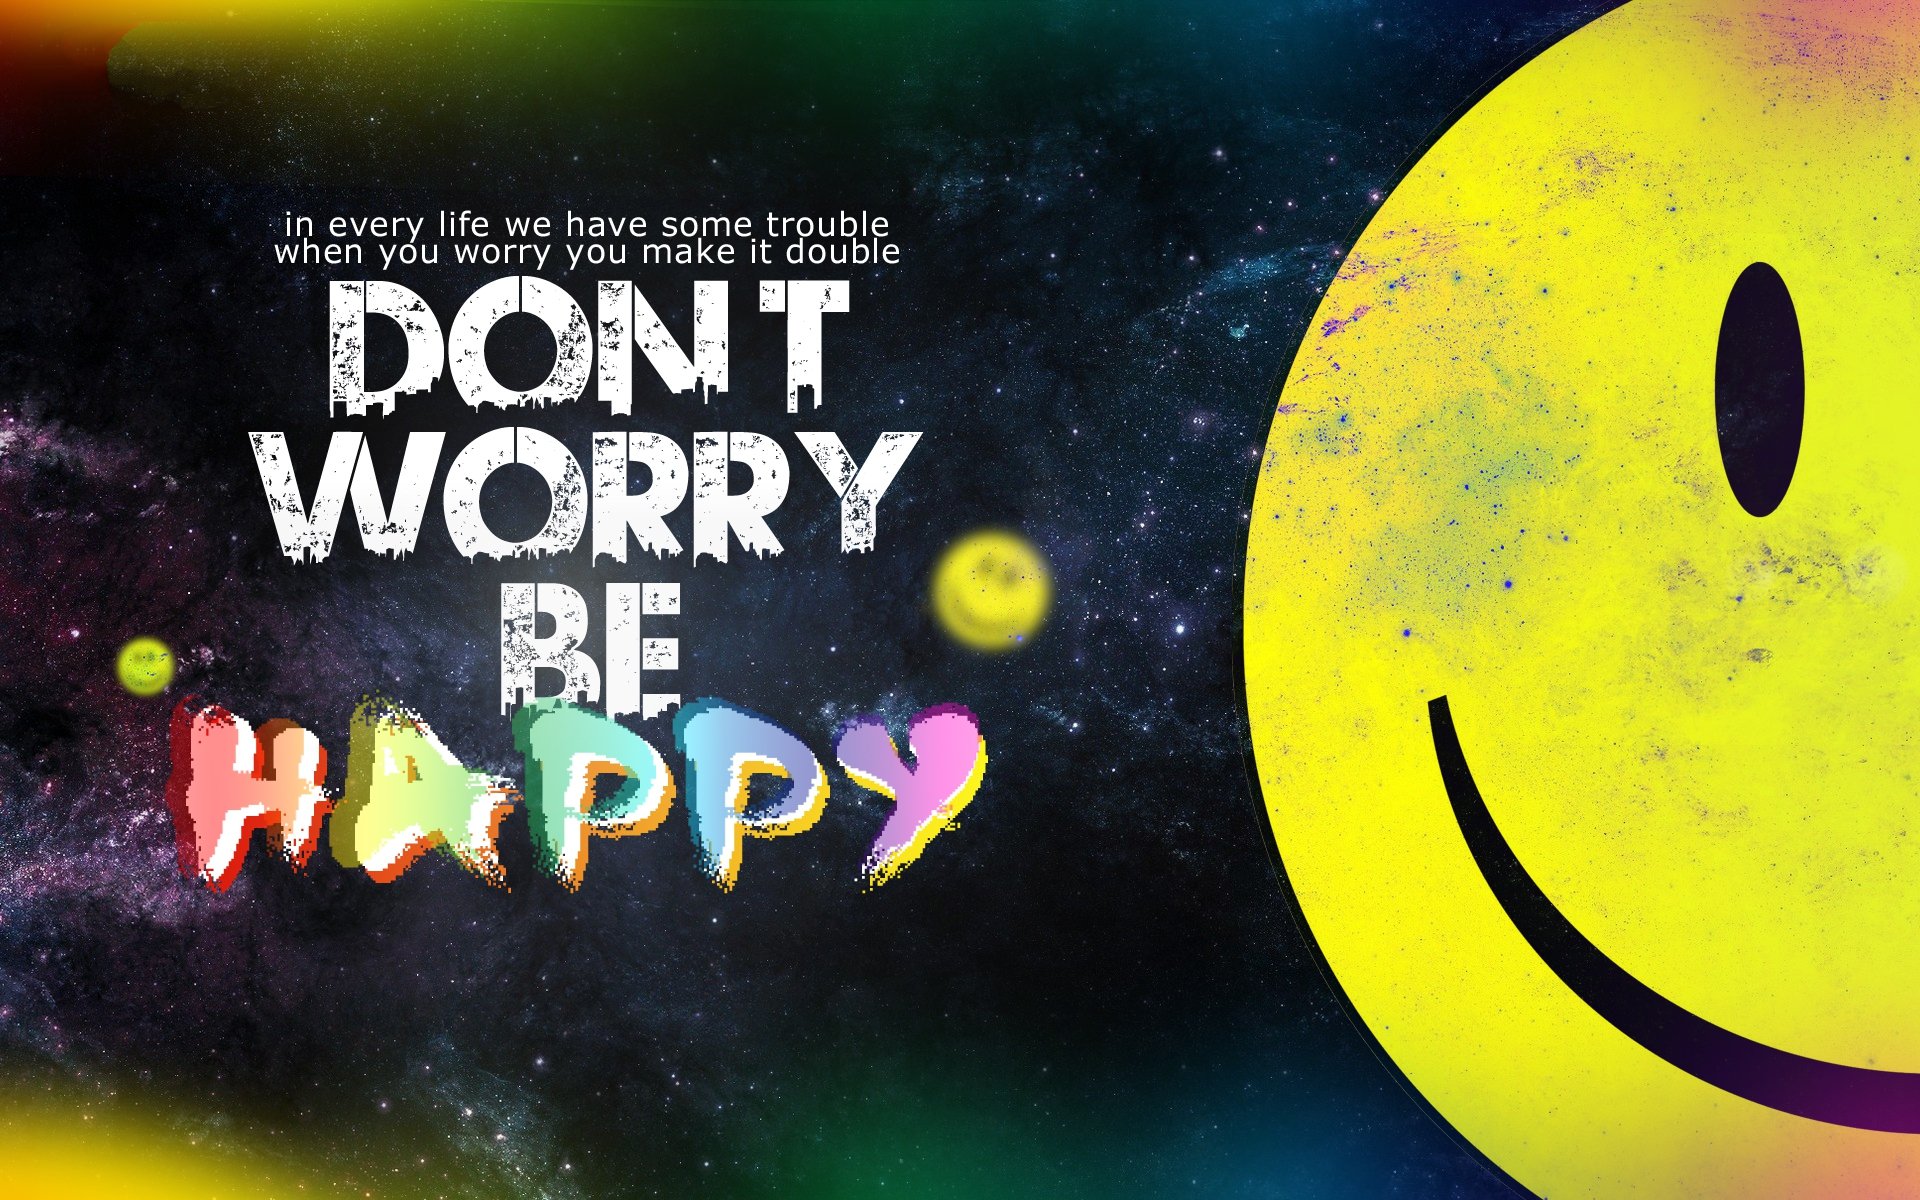 Bi happy. Don't worry be Happy. Донт вори би Хэппи. Надпись don't worry be Happy. Надпись донт вори би Хэппи.